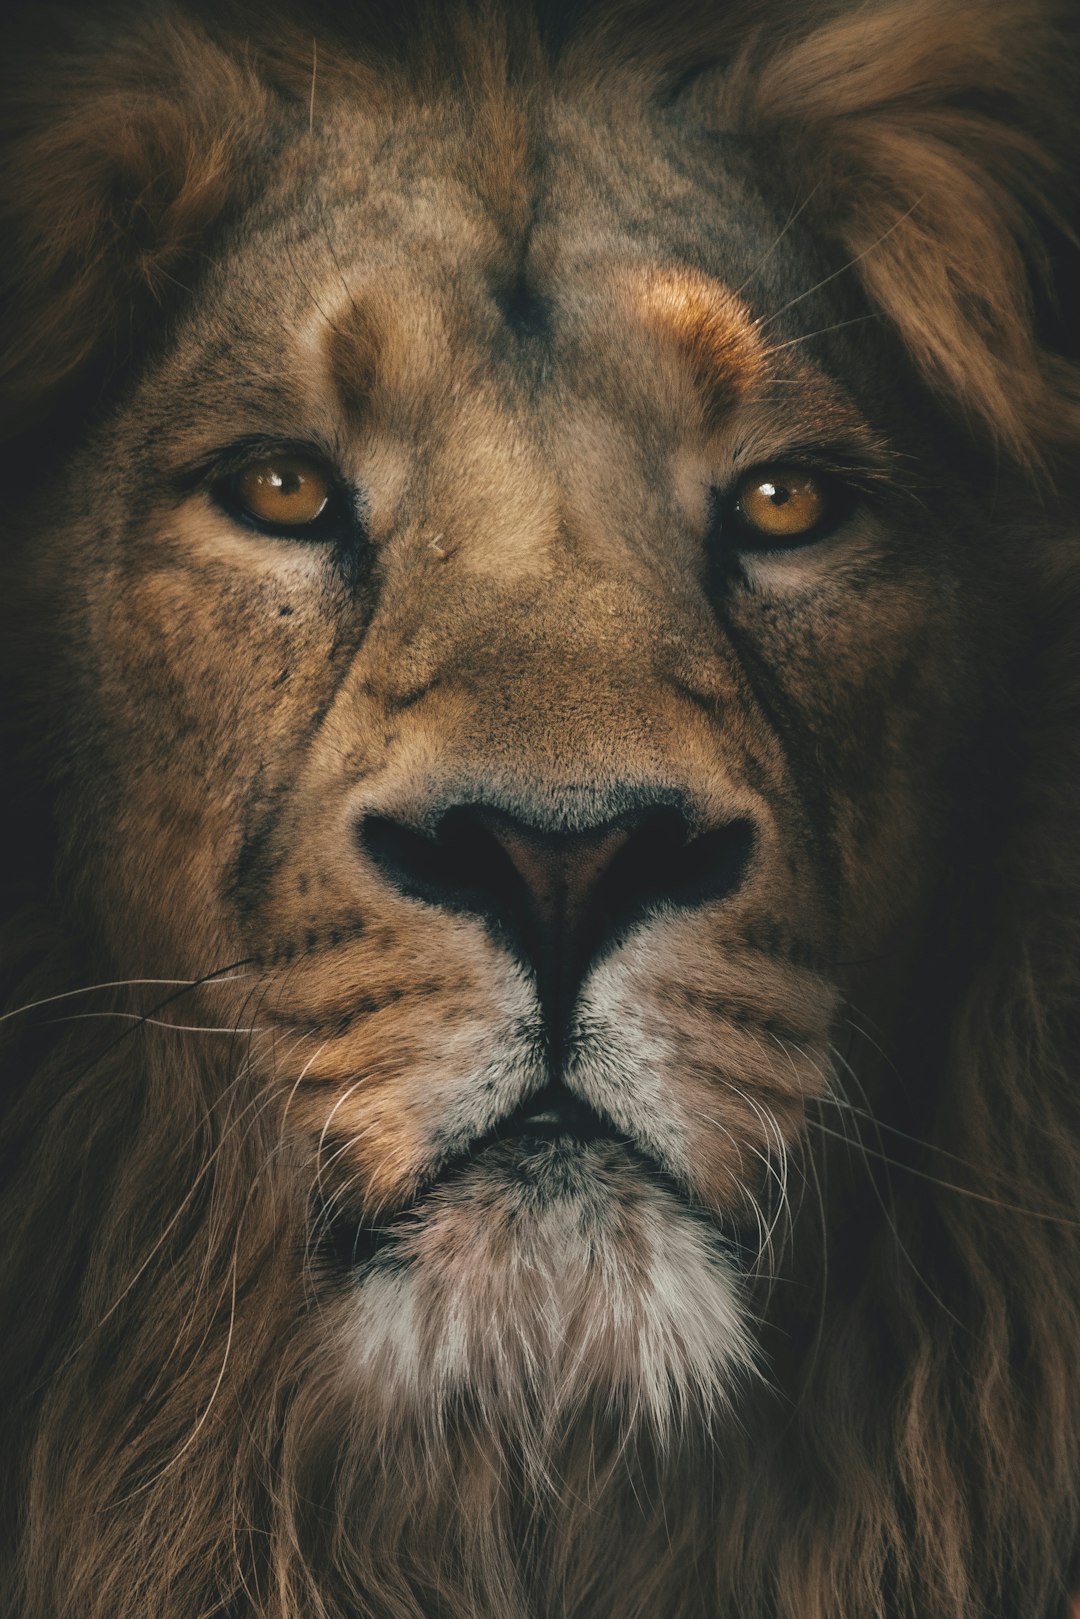  brown lion in close up photography lion